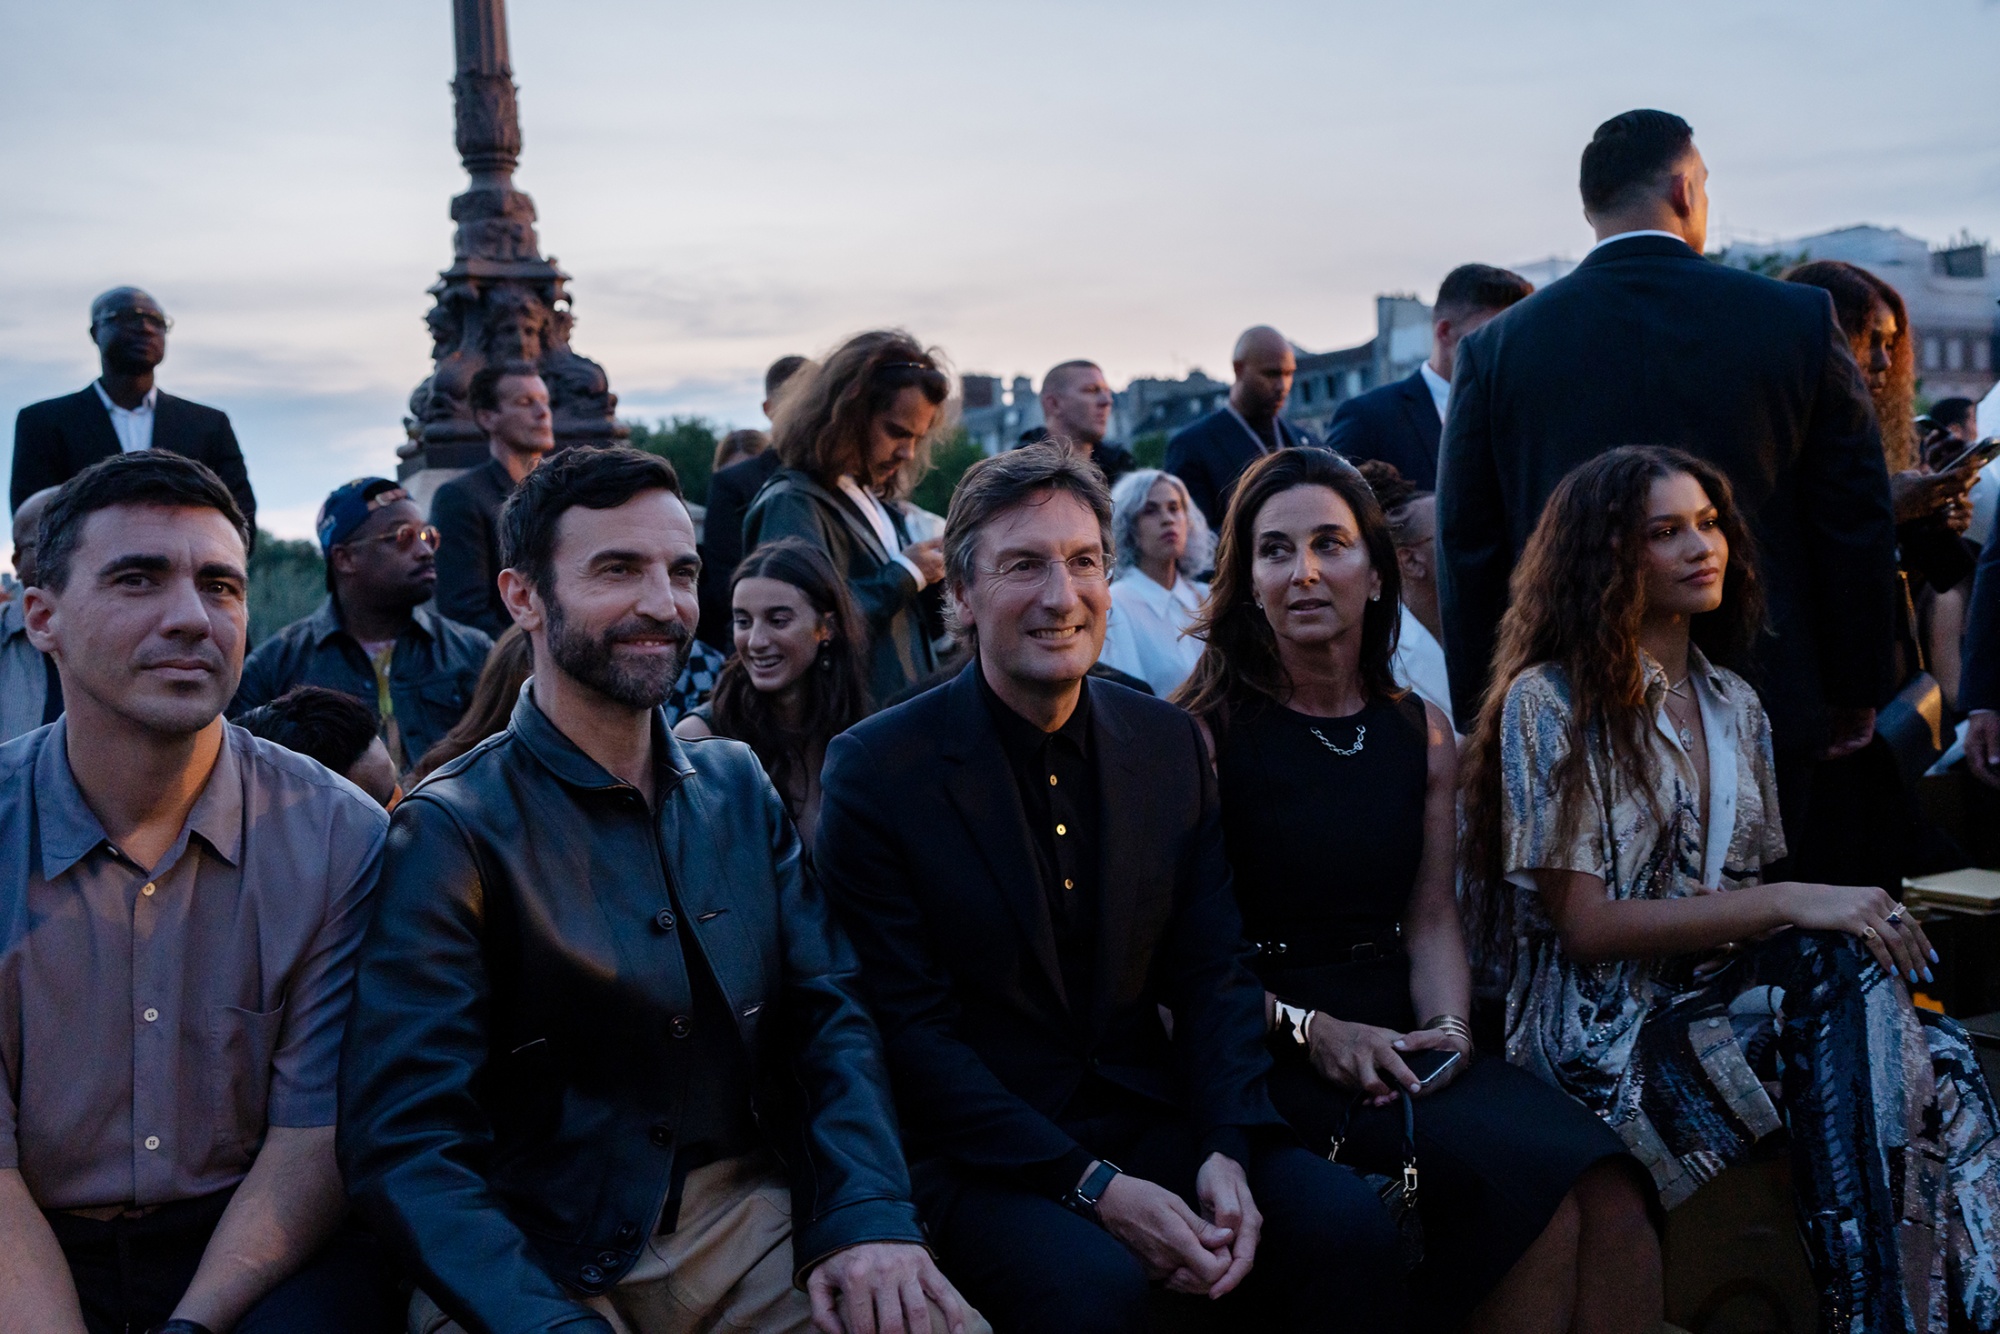 Meet Pietro Beccari: The new CEO of Louis Vuitton - Times of India